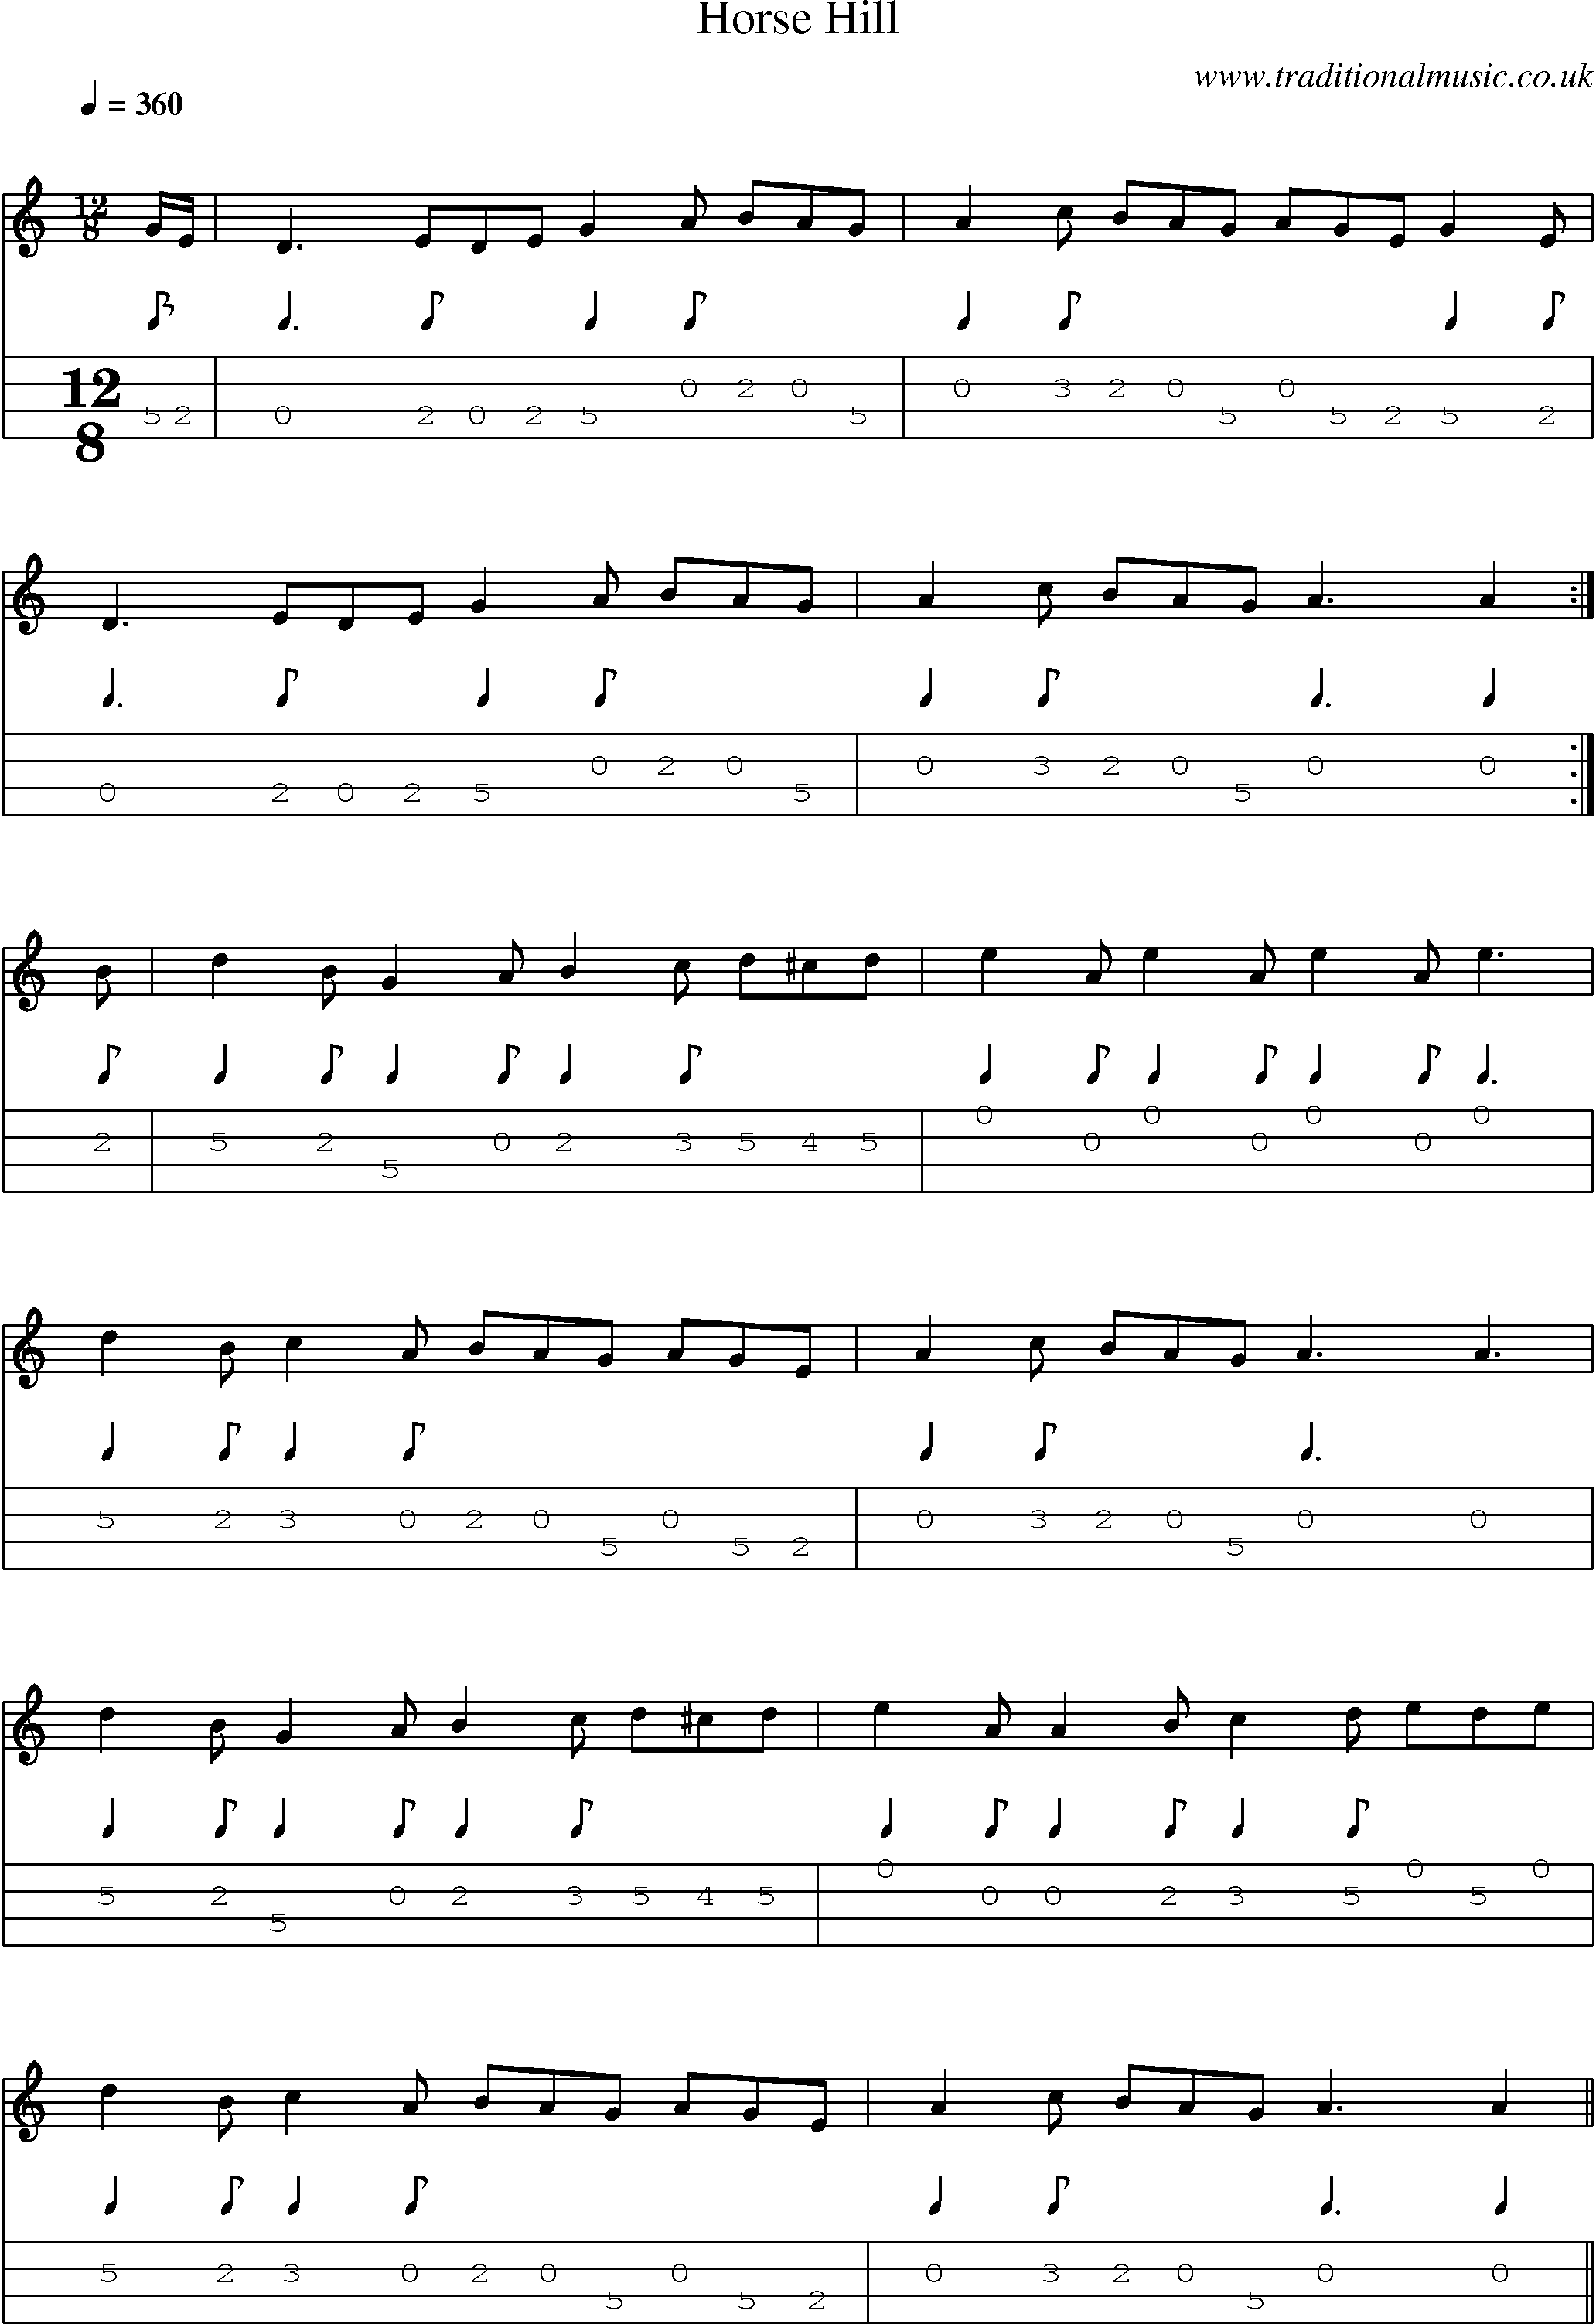 Music Score and Mandolin Tabs for Horse Hill